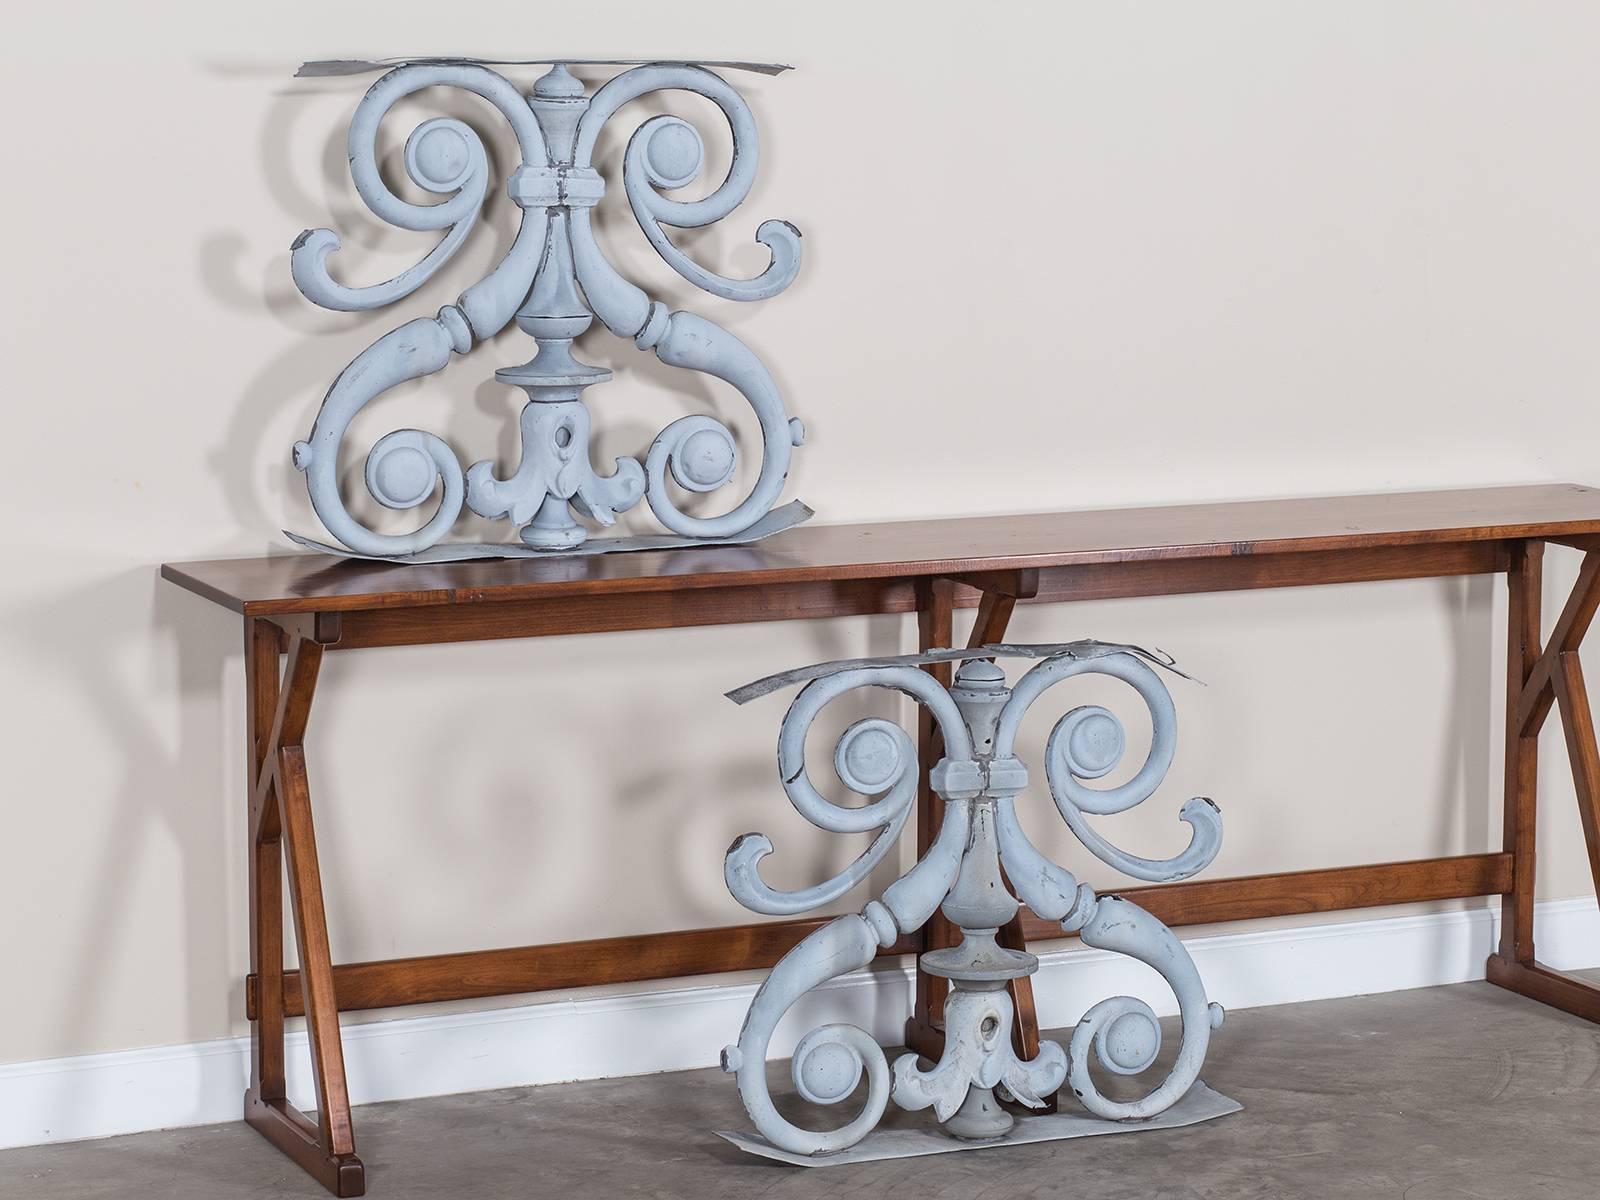 Receive our new selections direct from 1stdibs by email each week. Please click Follow Dealer below and see them first!

The lavishly curved antique French zinc ornaments circa 1850 were originally mounted in front of windows in a country house